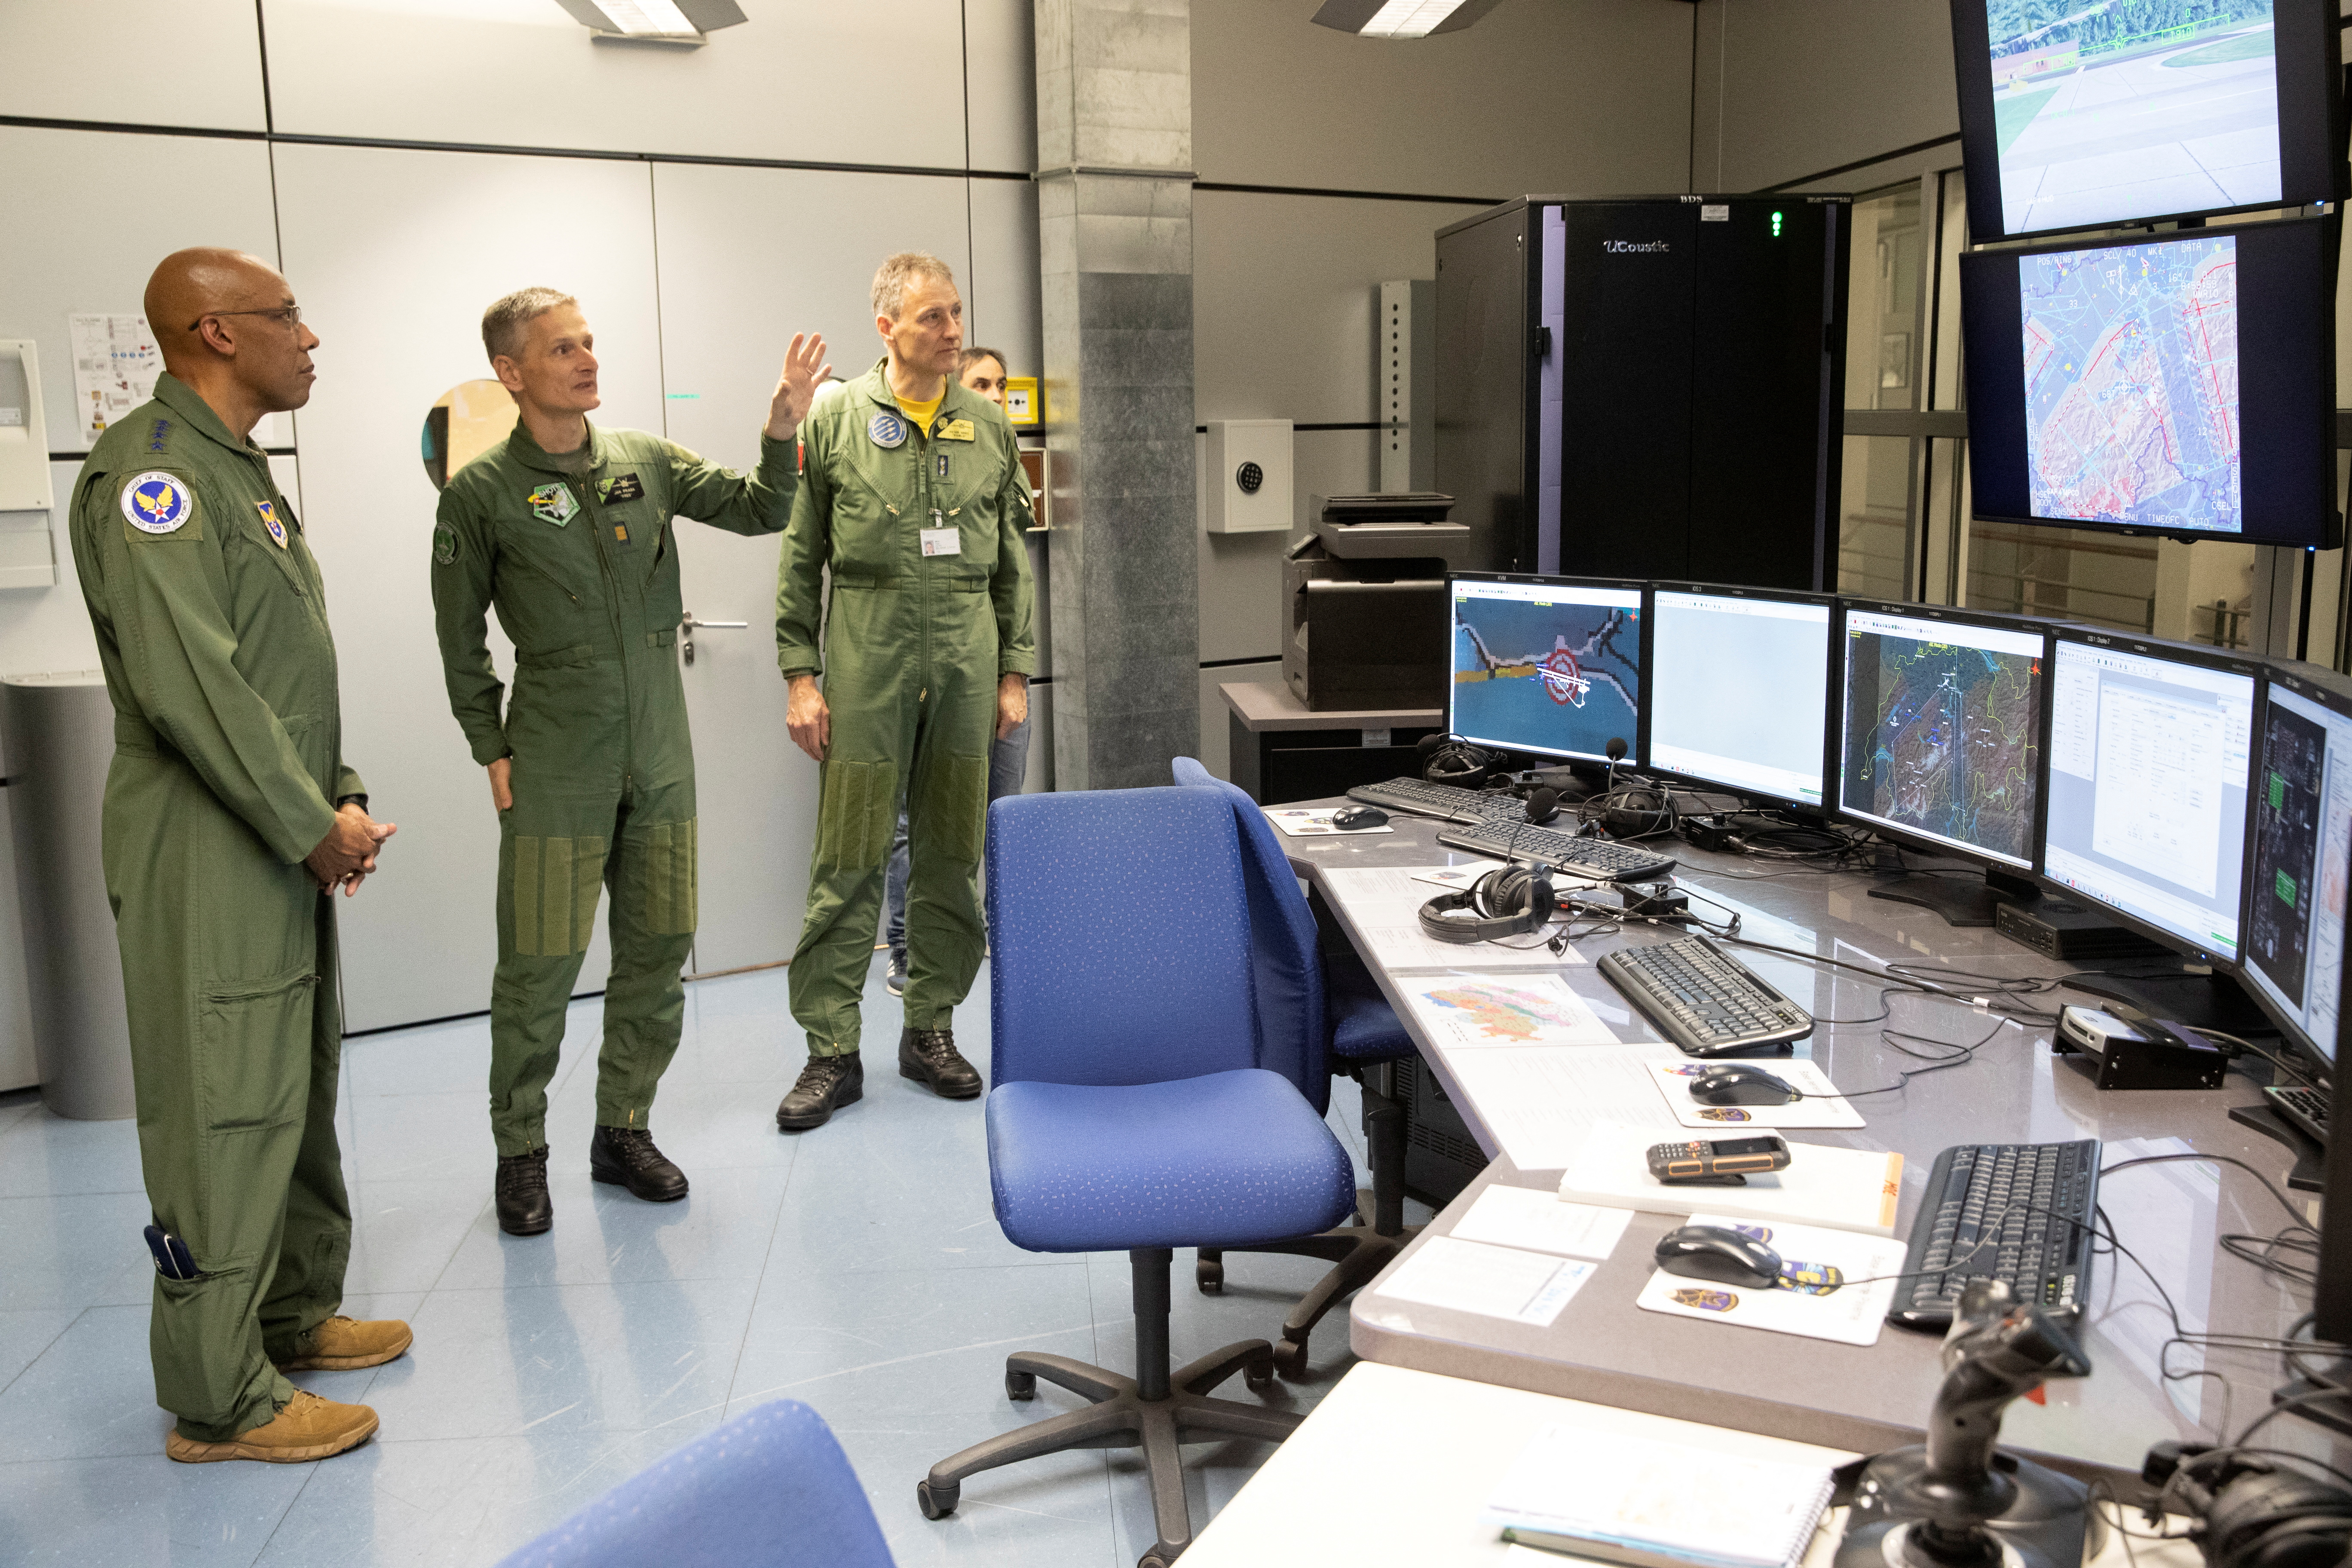 Commander of the Swiss Air Force General Merz and Chief of Staff of the U.S. Air Force General Brown Jr. visit a flight simulator in Payerne